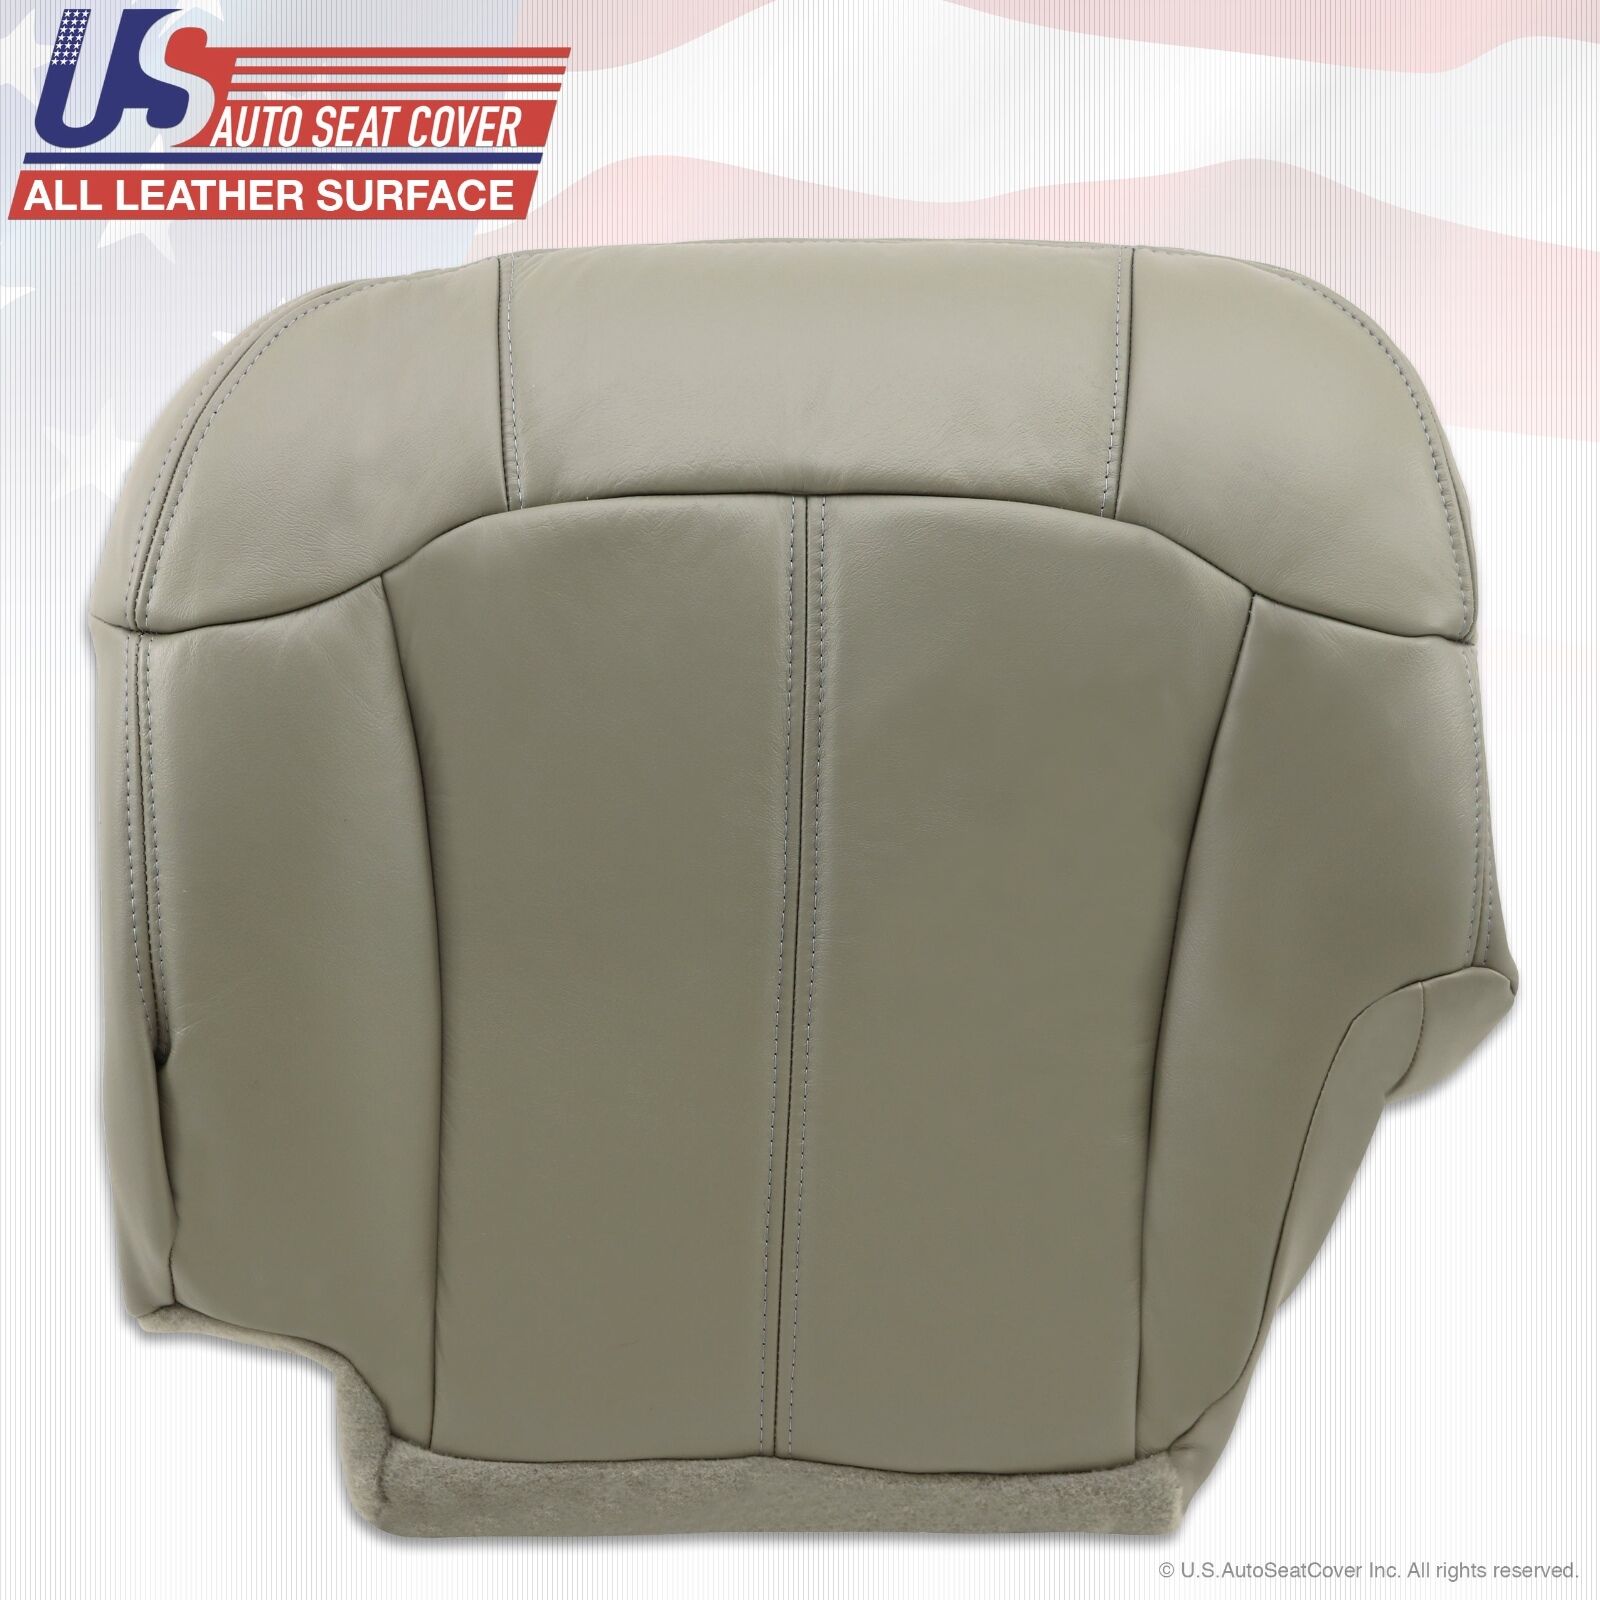 1999 2000 2001 2002 Chevy Tahoe Suburban Upholstery leather seat cover Gray 